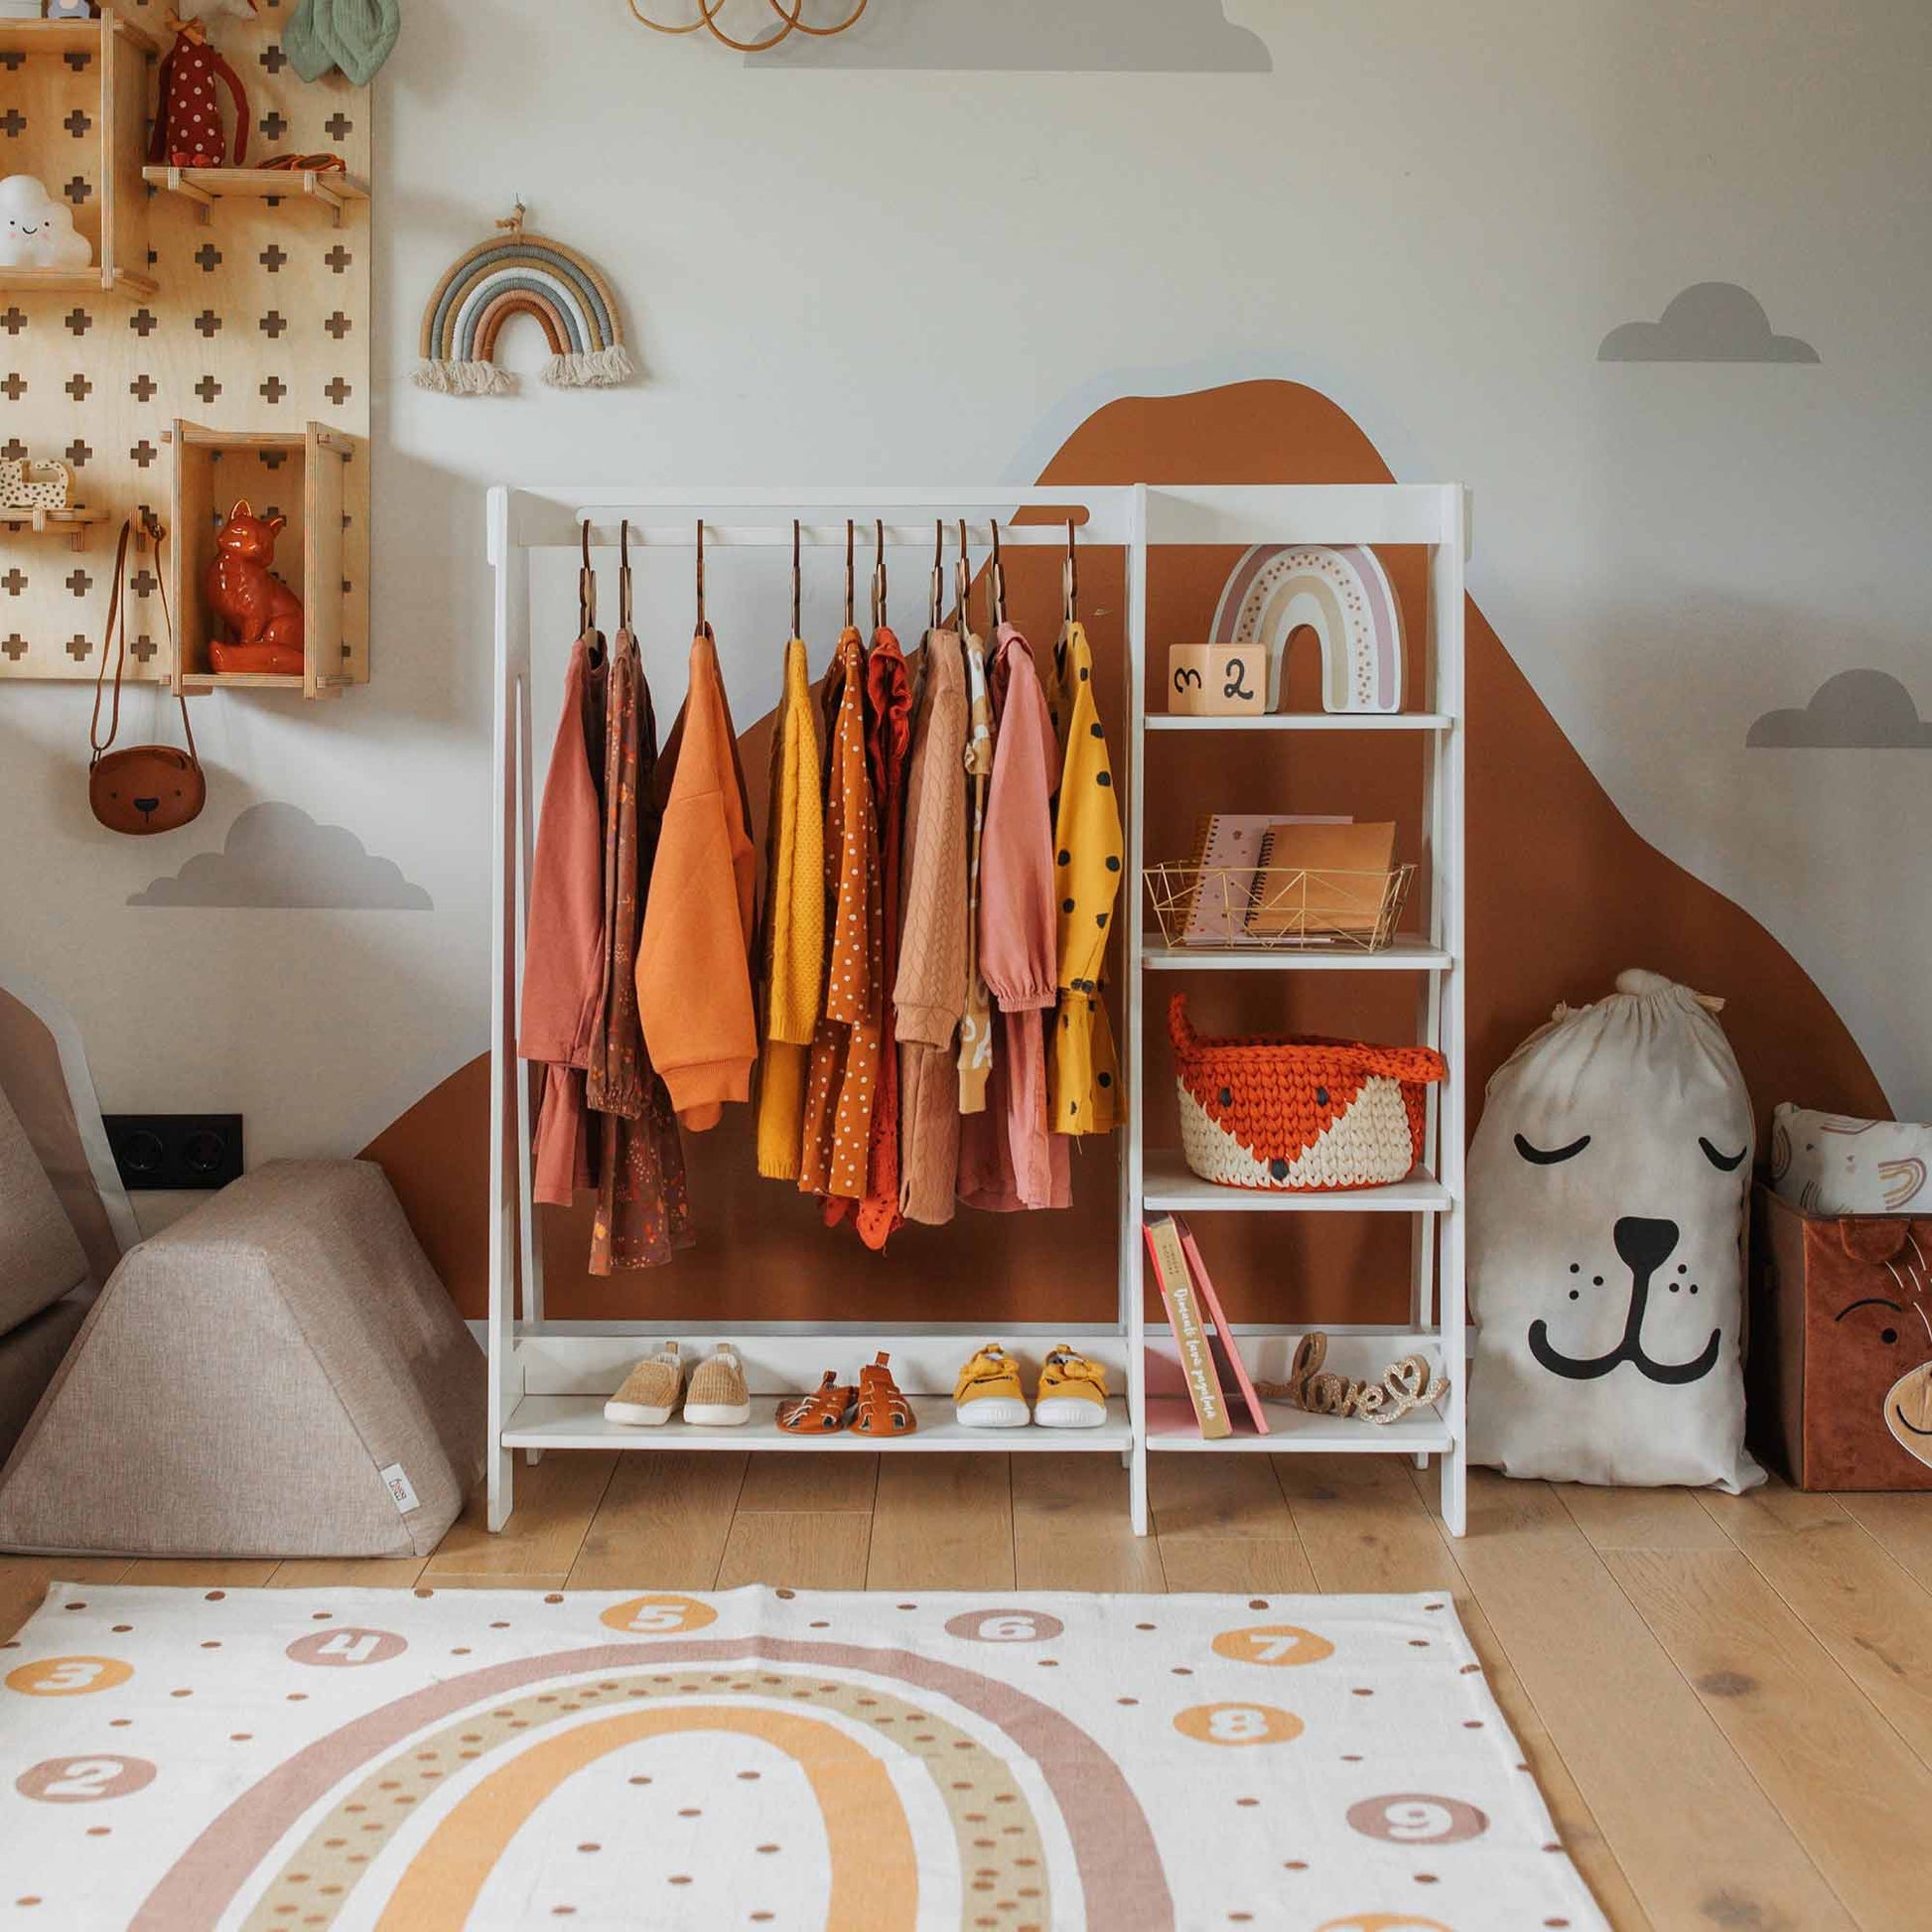 Children's room with a Montessori-inspired Children's wardrobe, dress-up clothing rack holding colorful clothes, storage shelves filled with books and toys, a large stuffed animal bag, and rainbow-themed decorations. A play mat featuring numbers on the floor adds an educational touch.